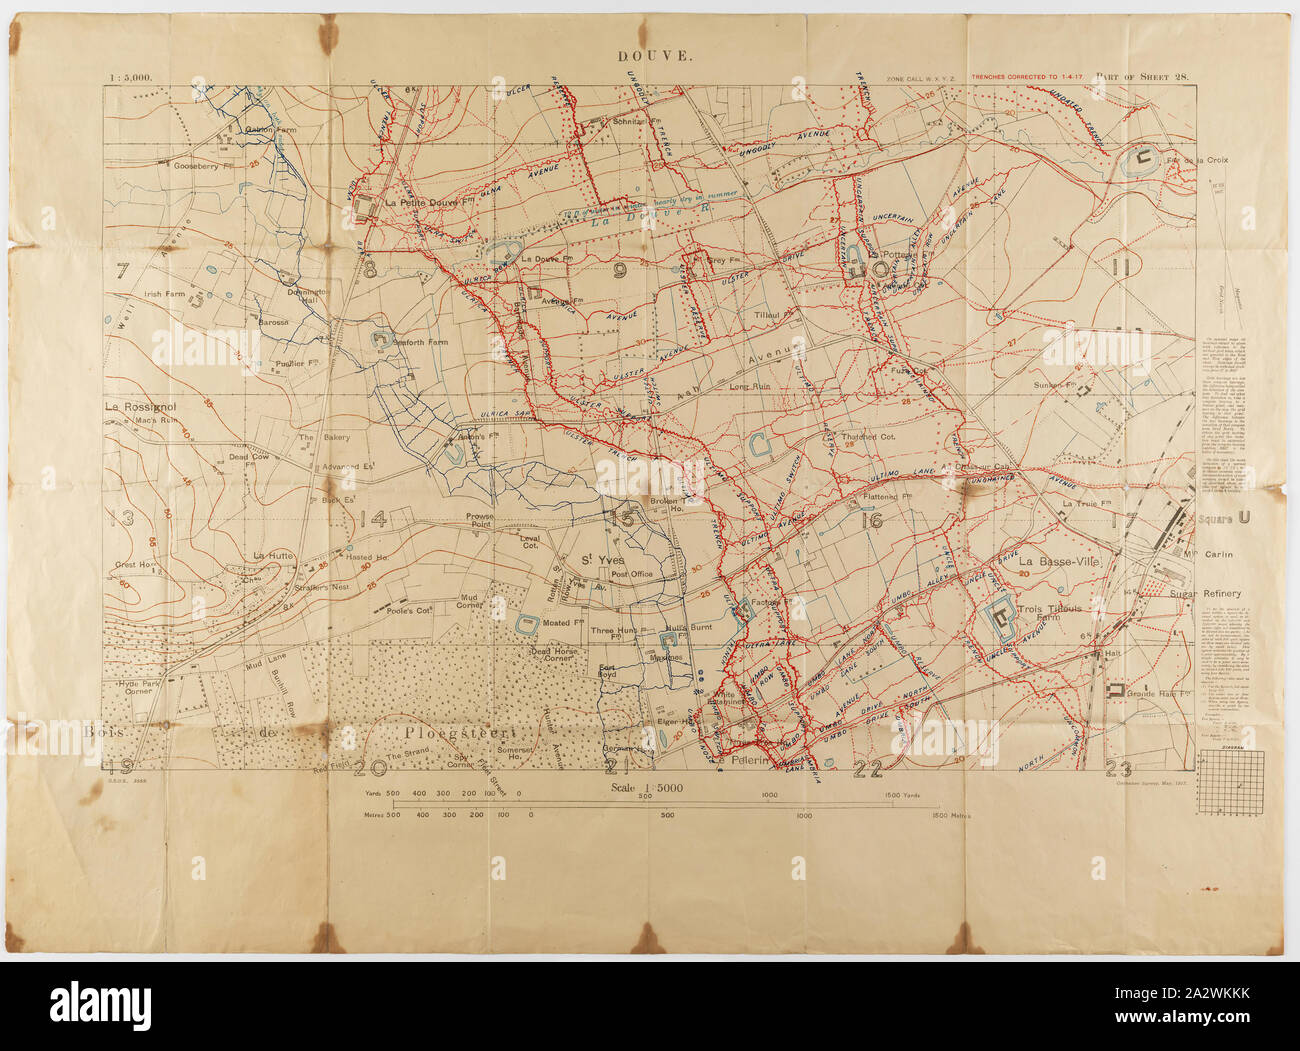 Map - Military, Trench, France, Douve, Sheet 28, Scale 1:5,000, World War I, May 1917, Alternative Name(s): Military Map Ordnance Survey trench map, Douve, France, World War I, dated May 1917. Part of sheet 28. Scale 1:5,000. Trenches corrected to 1:4:17. Used by Captain Morris Lewis during World War I, the map is inscribed 'M. Lewis. Lieut.' Captain Morris Lewis, 44th Battalion, Third Division, First AIF, was born in Wales in 1892 of Jewish heritage. He was a 23-year-old tailor Stock Photo